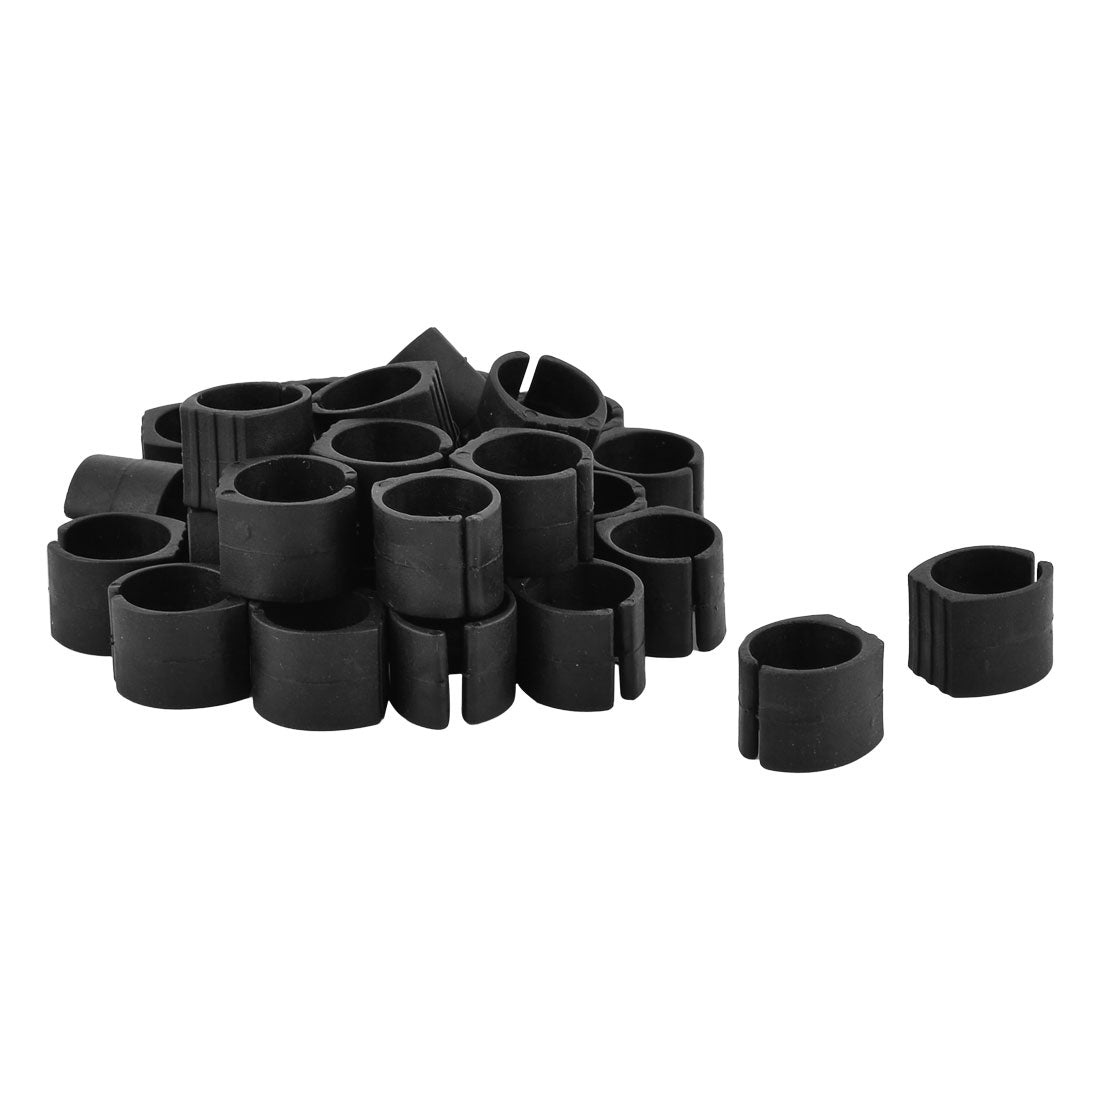 uxcell Uxcell Home Office Plastic Chair Foot Leg Pipe Ending Cap Protector Tube Insert Black 30pcs